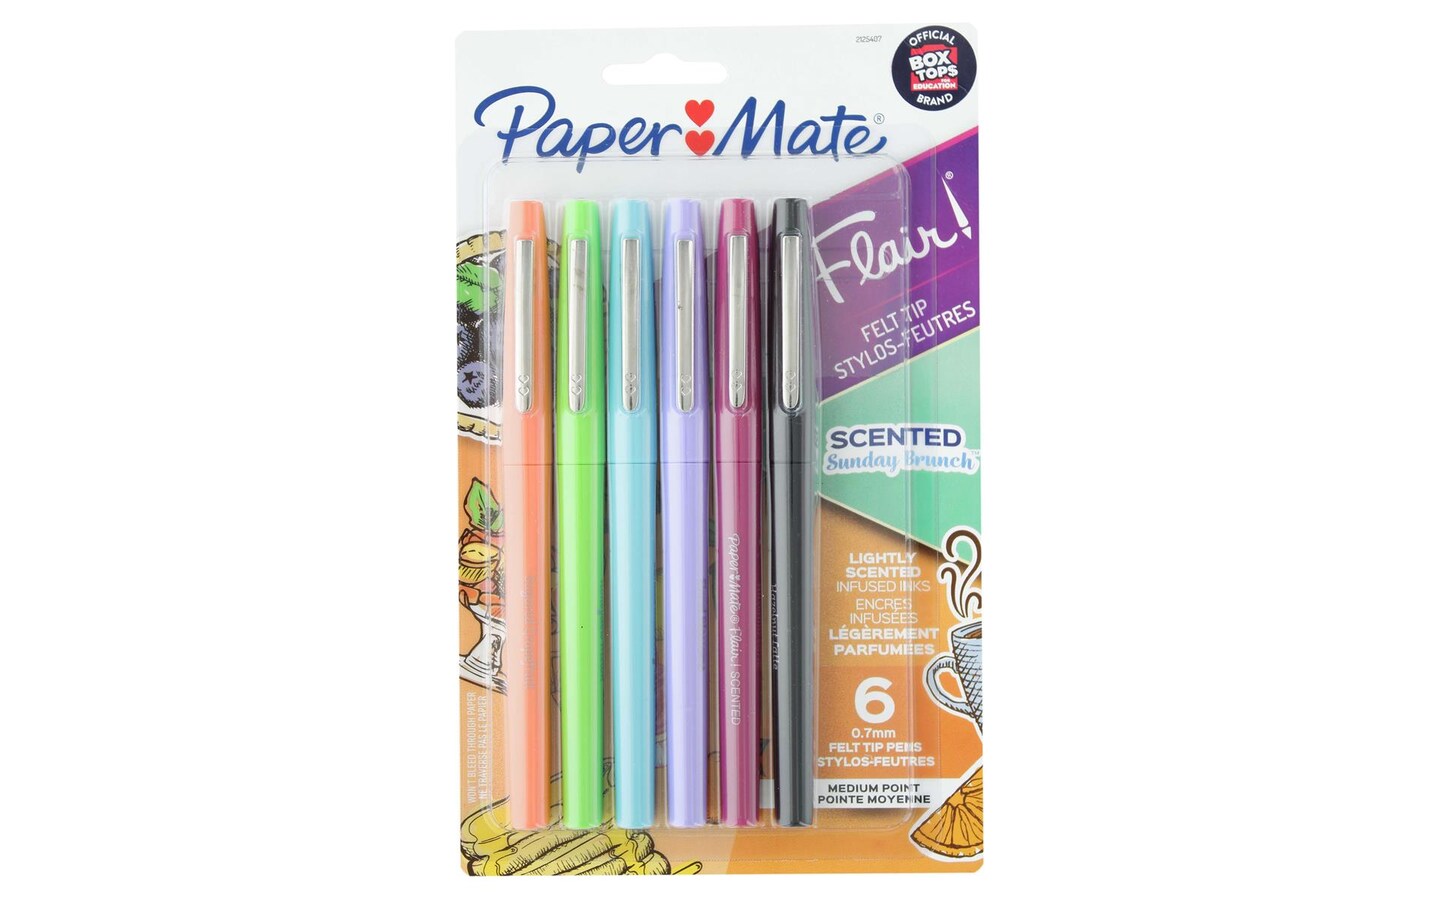 Paper Mate Flair Med Pt Scented Sunday Brunch 6pc